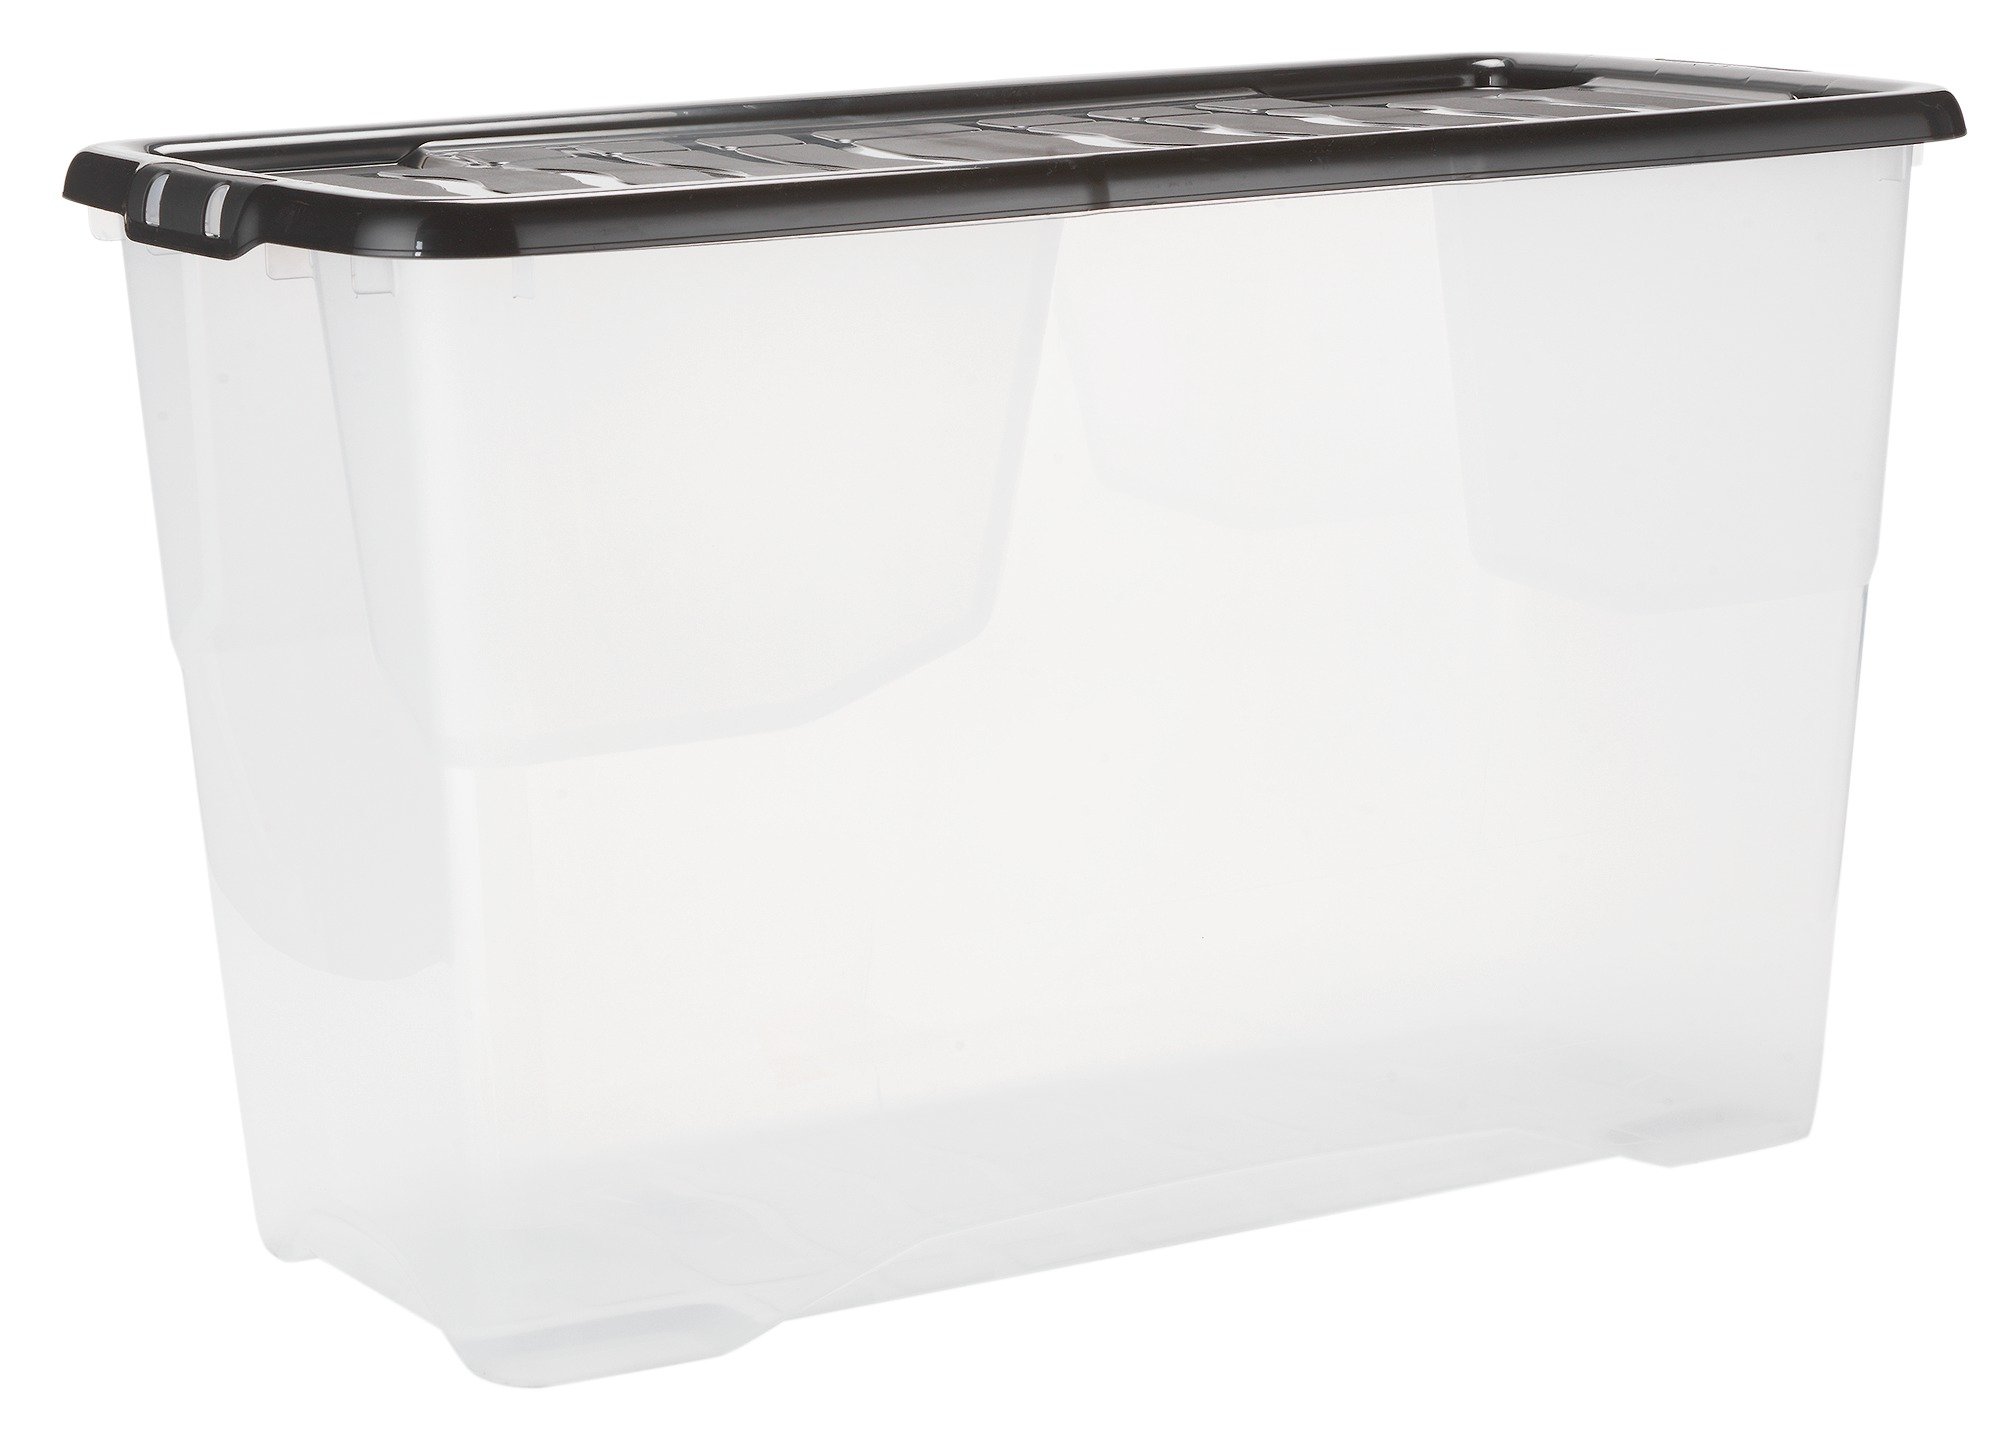 Argos Home 100 Litre Curved Plastic Storage Box and Lid review